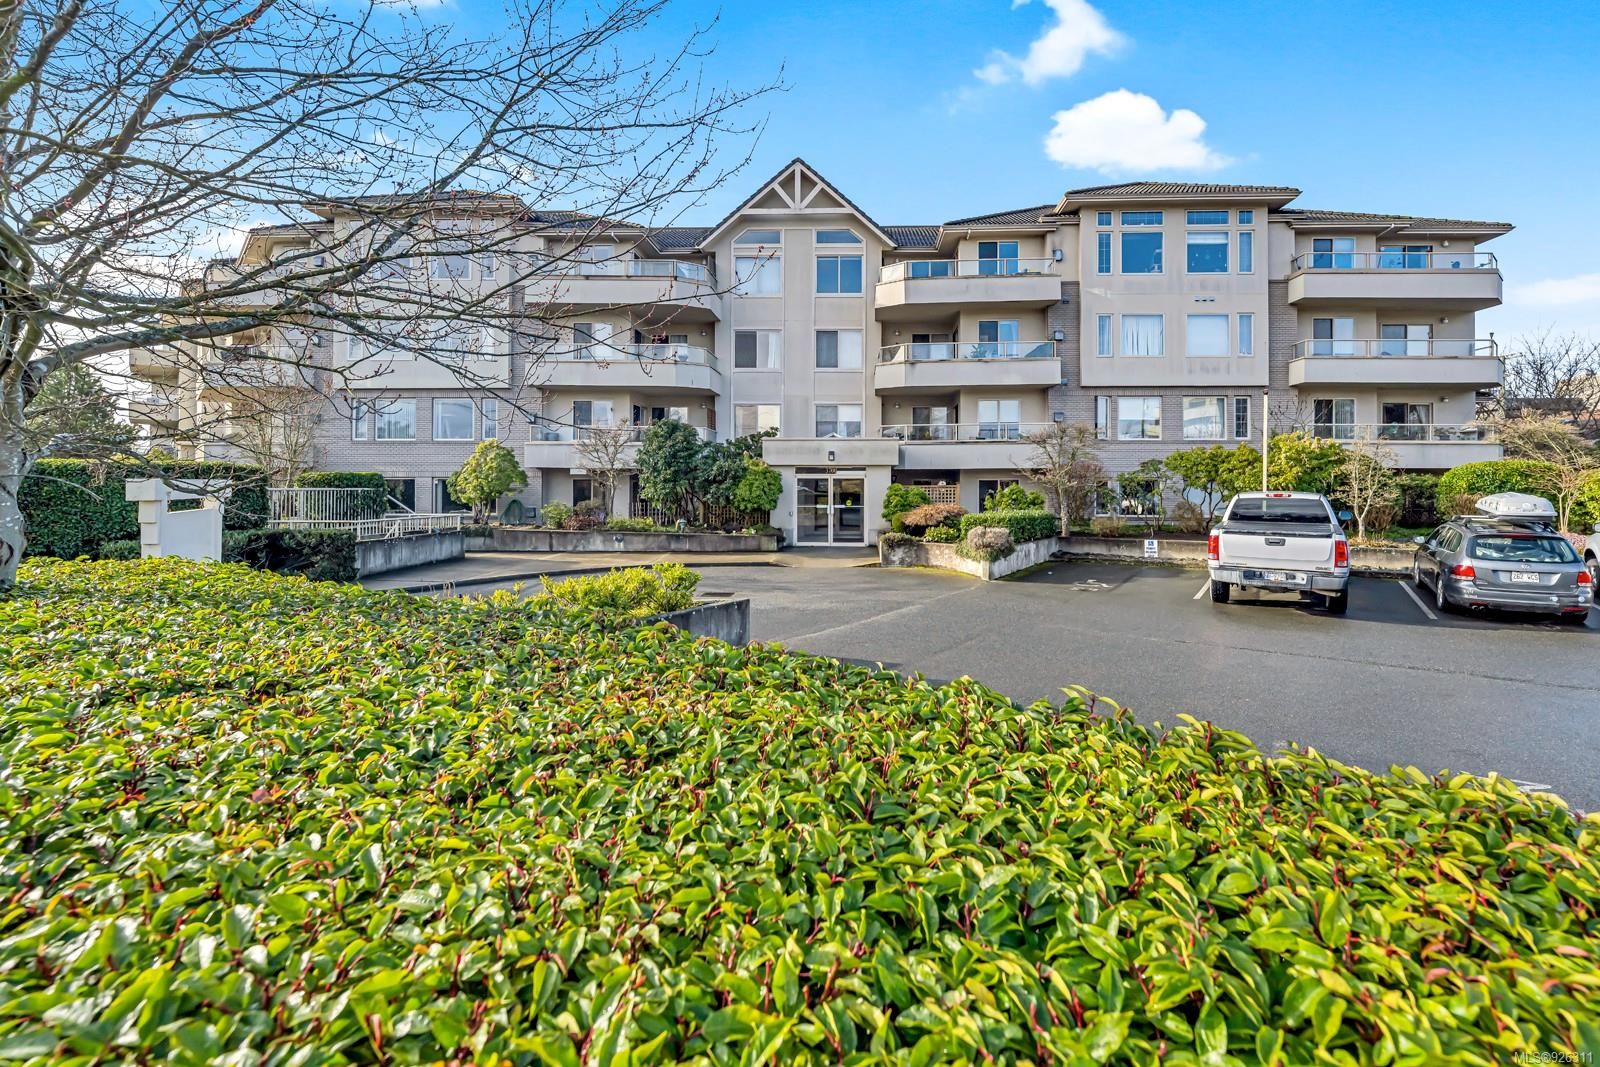 New property listed in SW Gateway, Saanich West